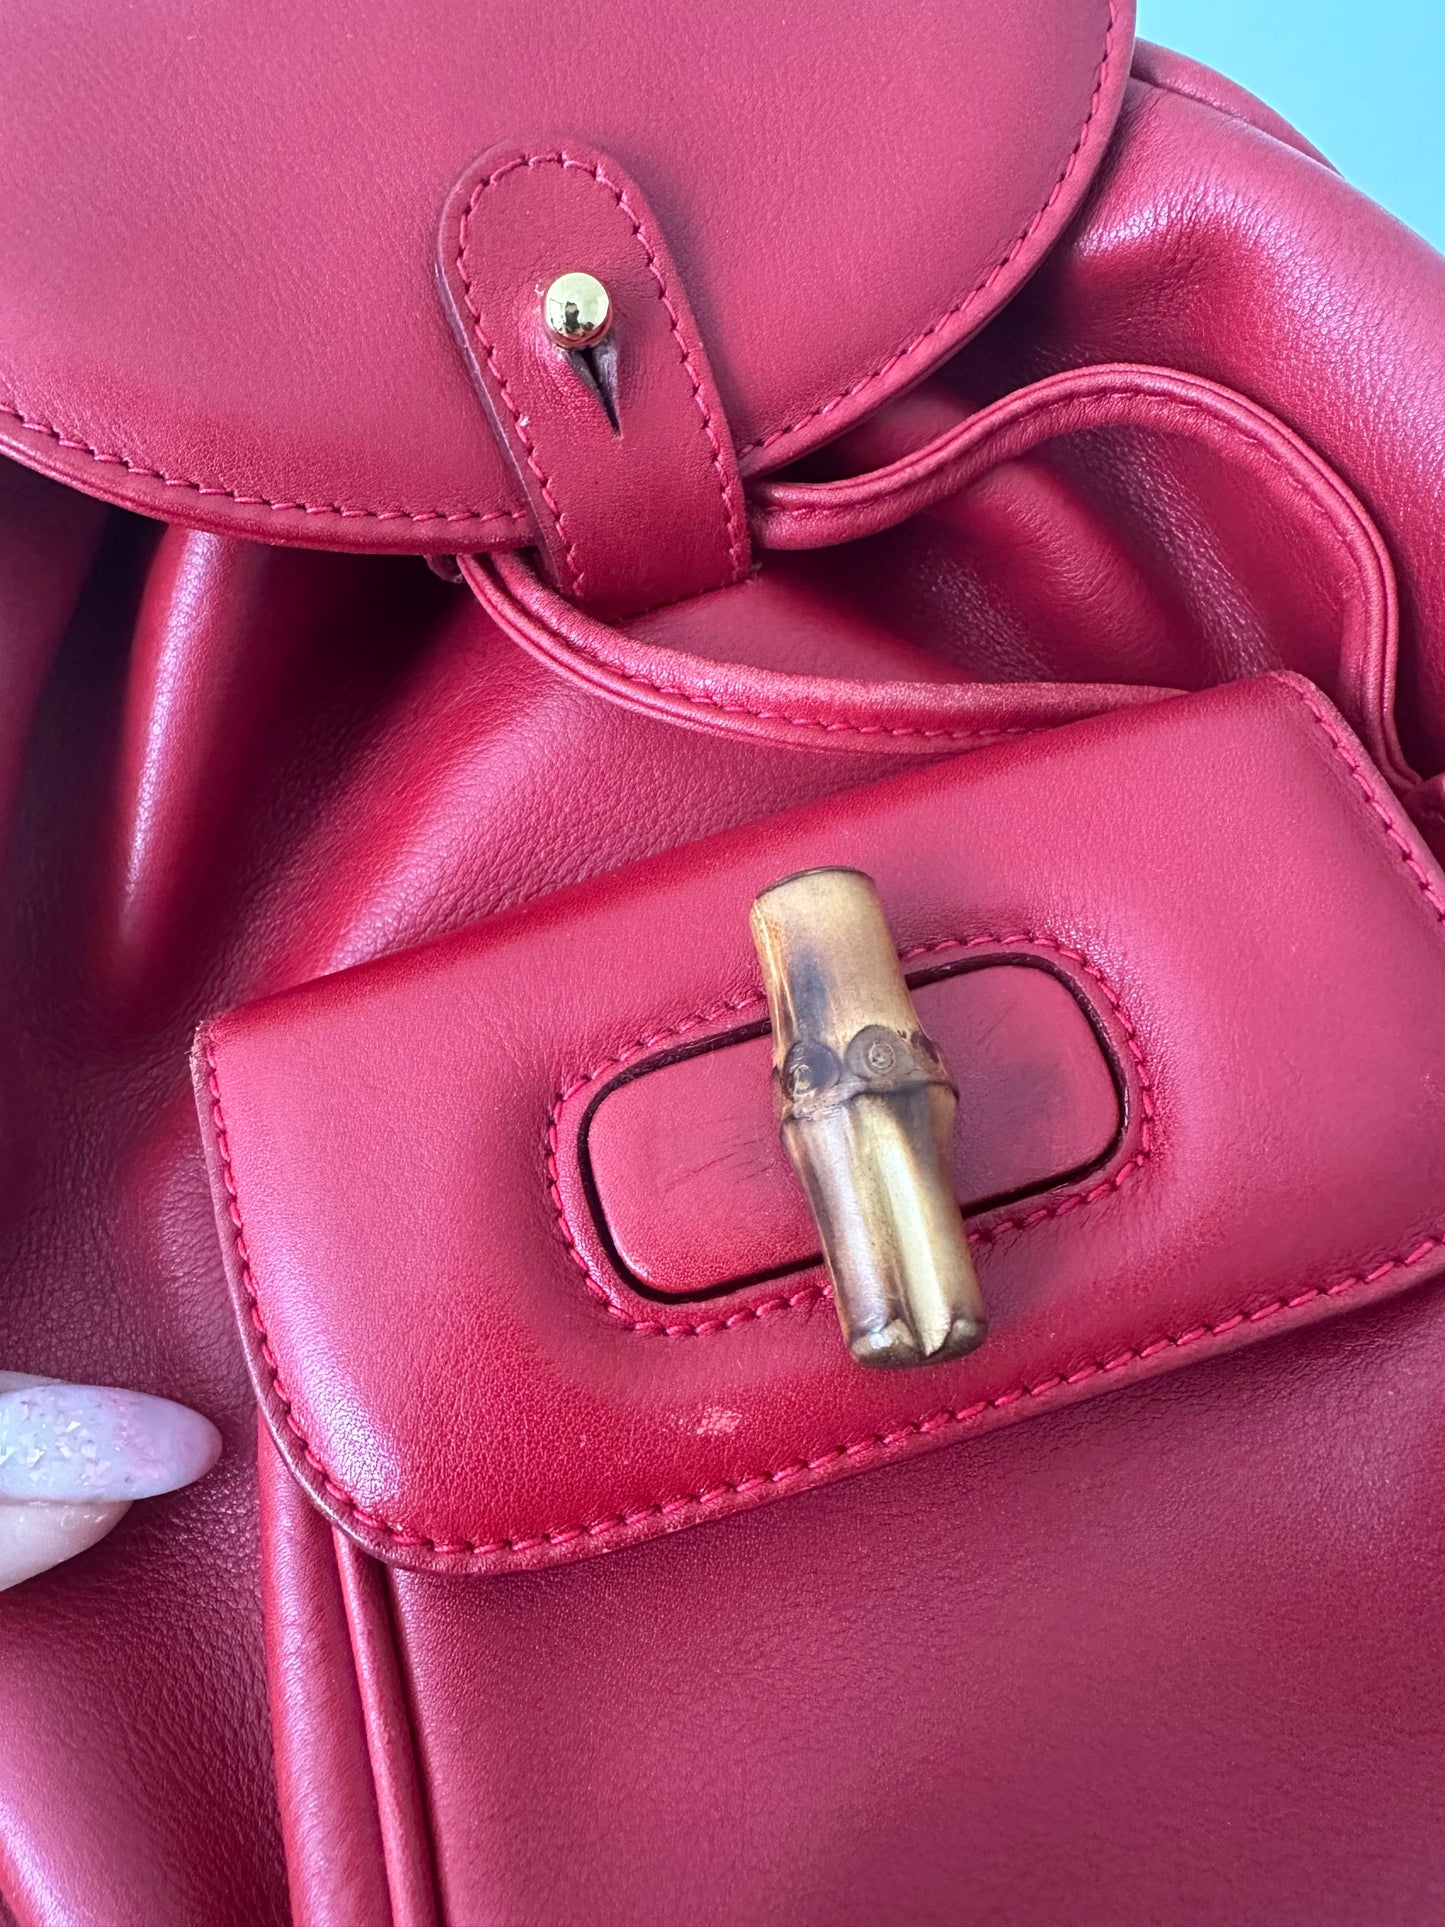 Vintage Red Gucci Small Leather Backpack